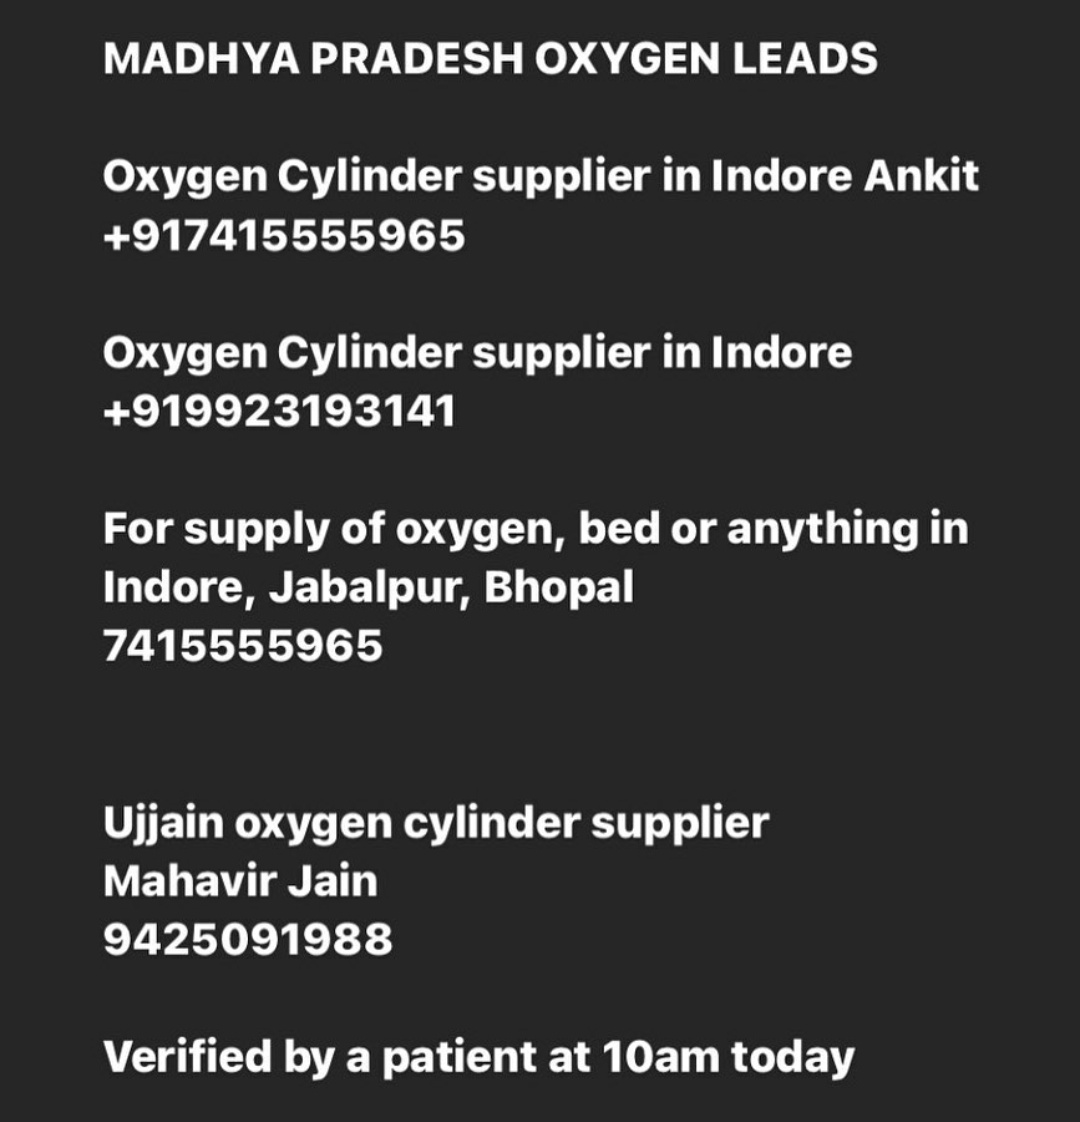 Helpline for Noida as well as Oxygen leads for Madhya pradesh.